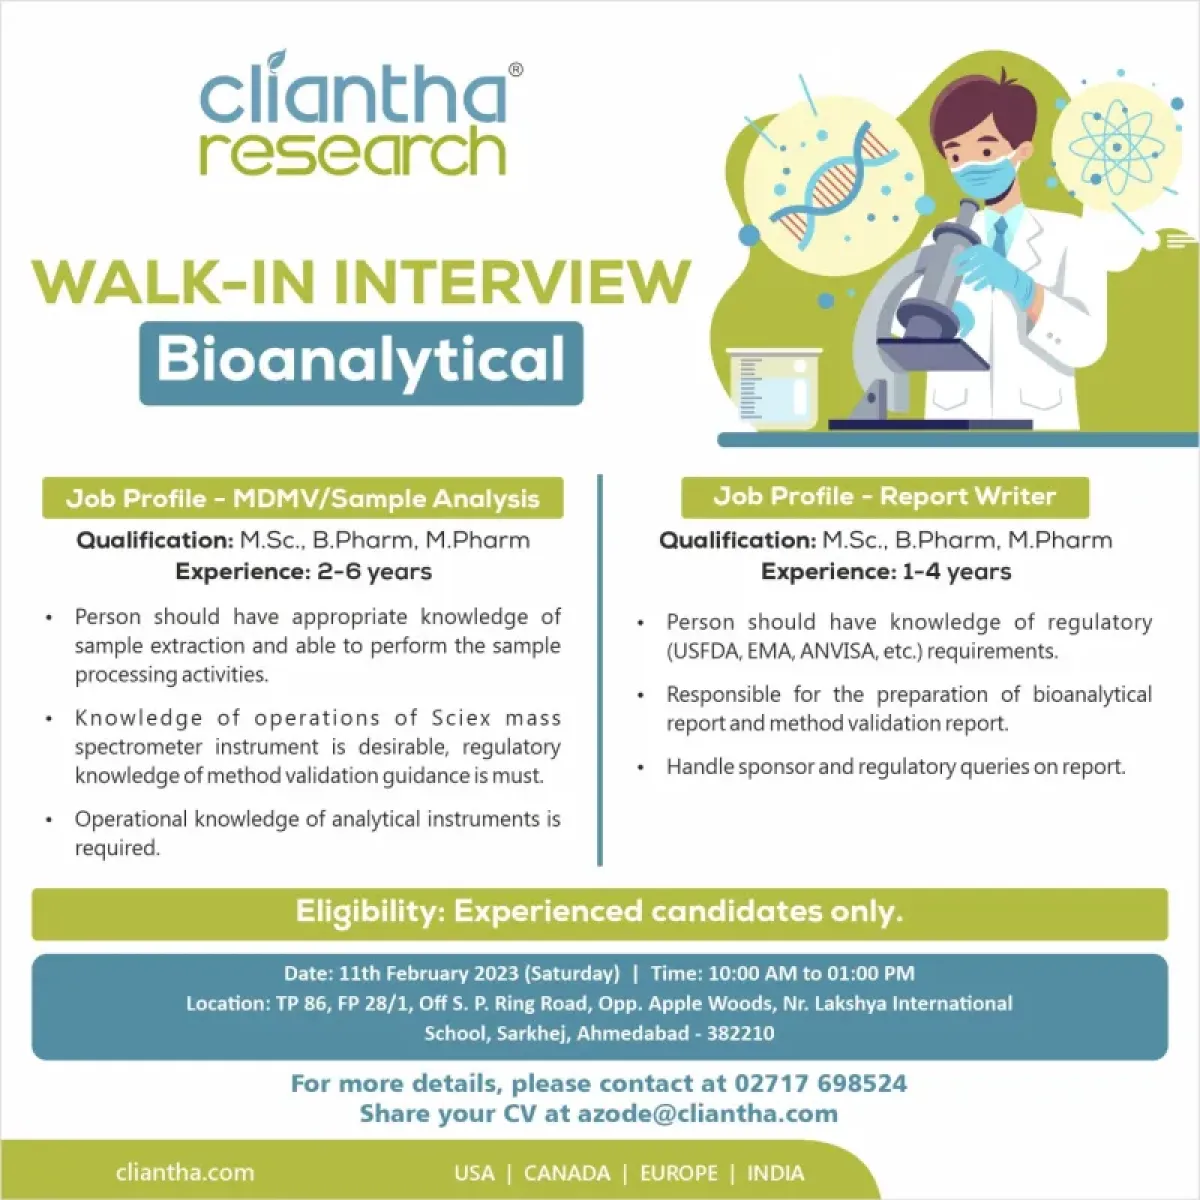 Cliantha Research jobs - Bioanalytical Report Writer and Sample Analysis